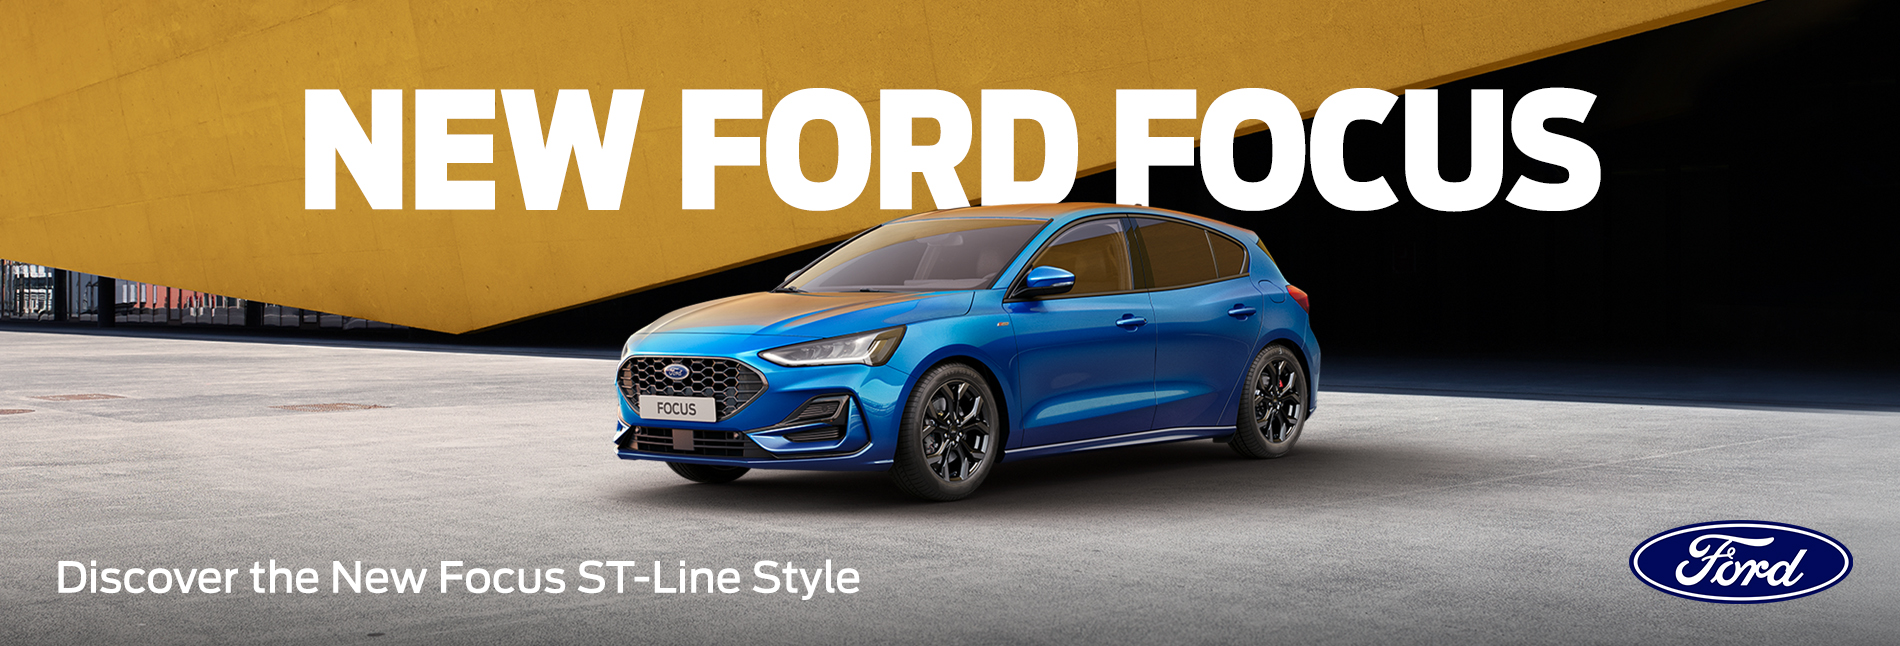 New Ford Focus ST-Line Style